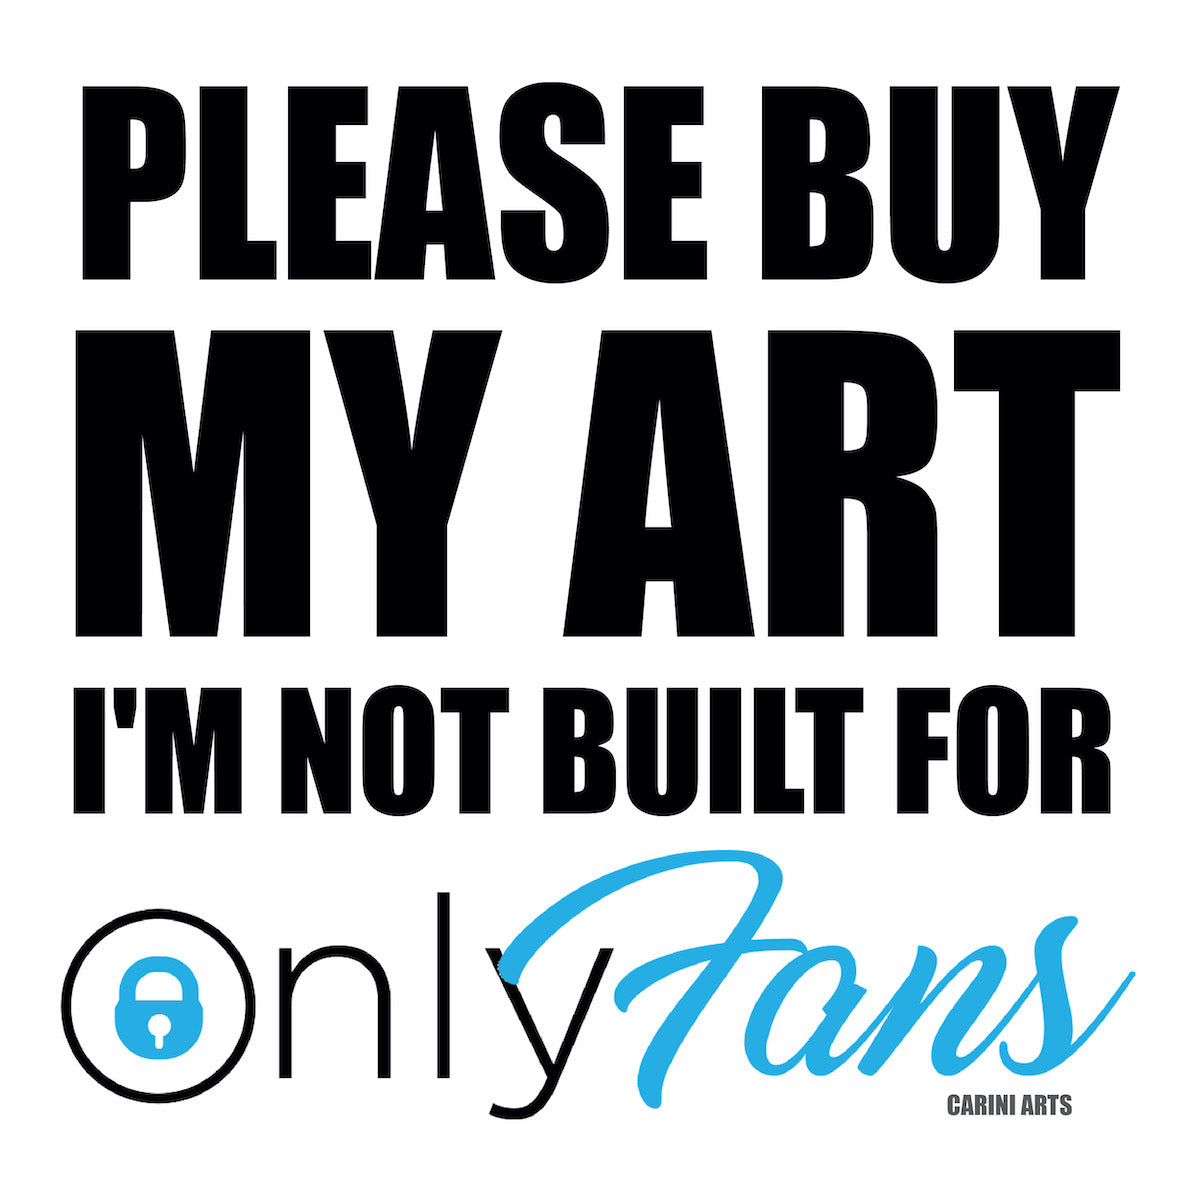 the best OnlyFans art quote of the pandemic from San Diego artist Michael Carini of Carini Arts